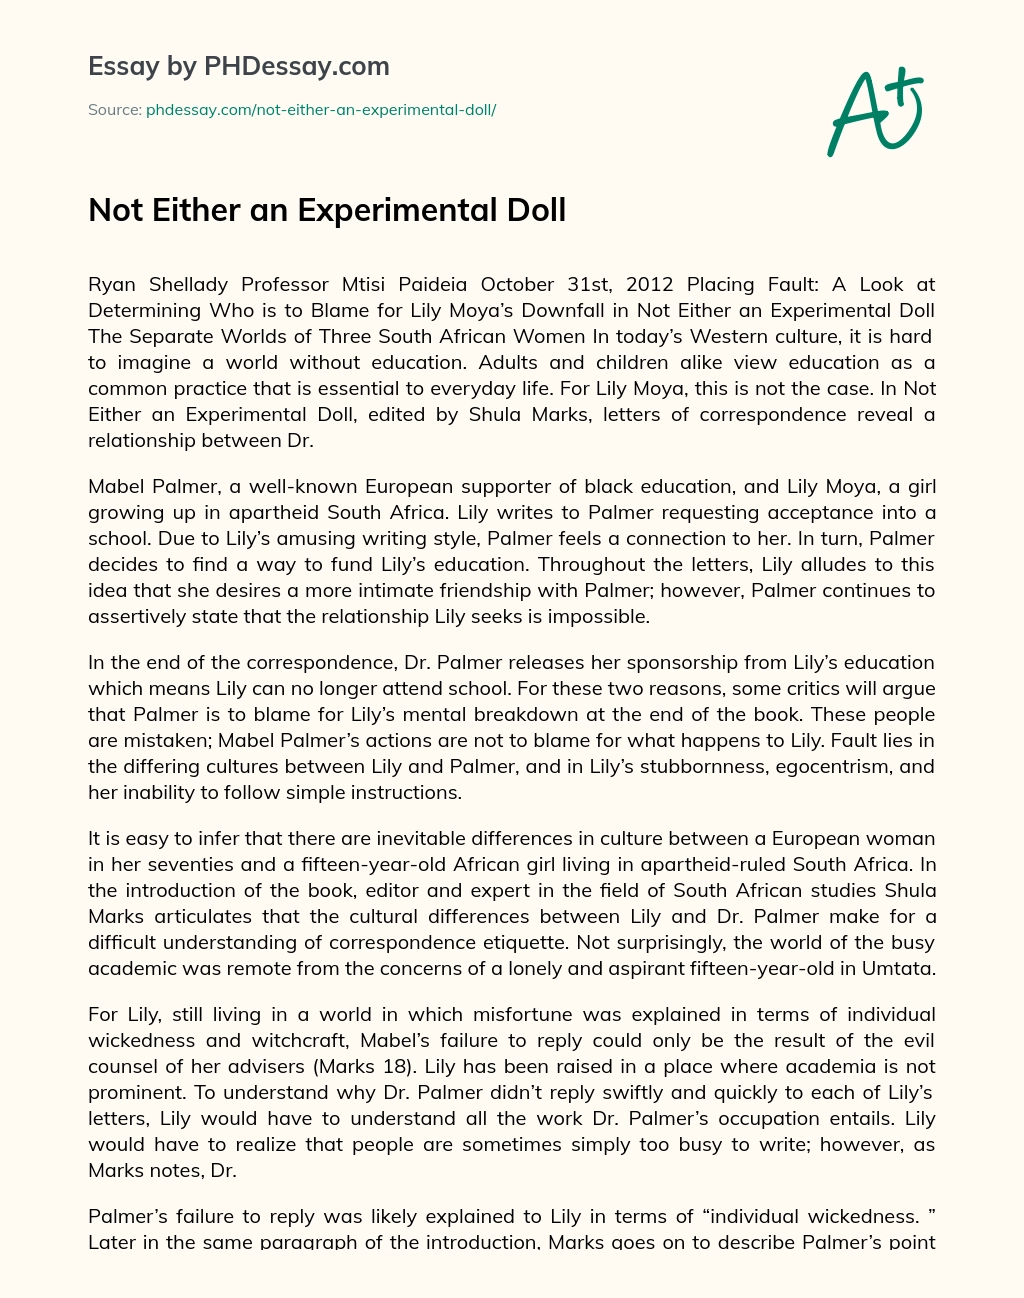 Not Either an Experimental Doll essay